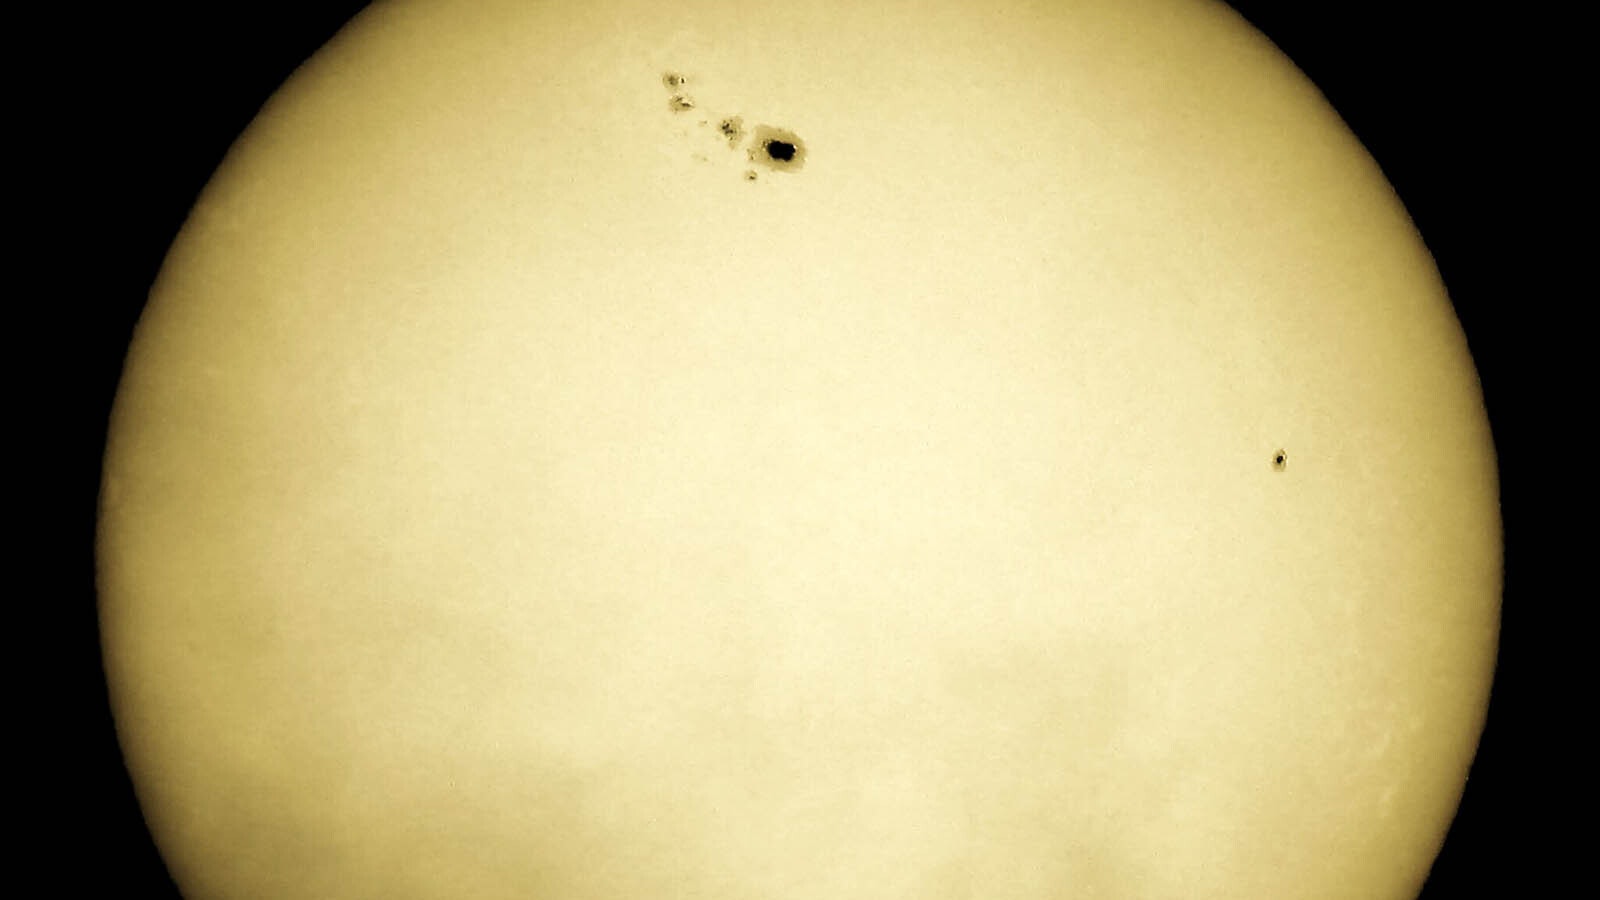 This naked eye sunspot — basically a spot on the sun so huge it can be easily seen — looks like the Hawaiian islands. It was captured with a Nikon Coolpix P950.